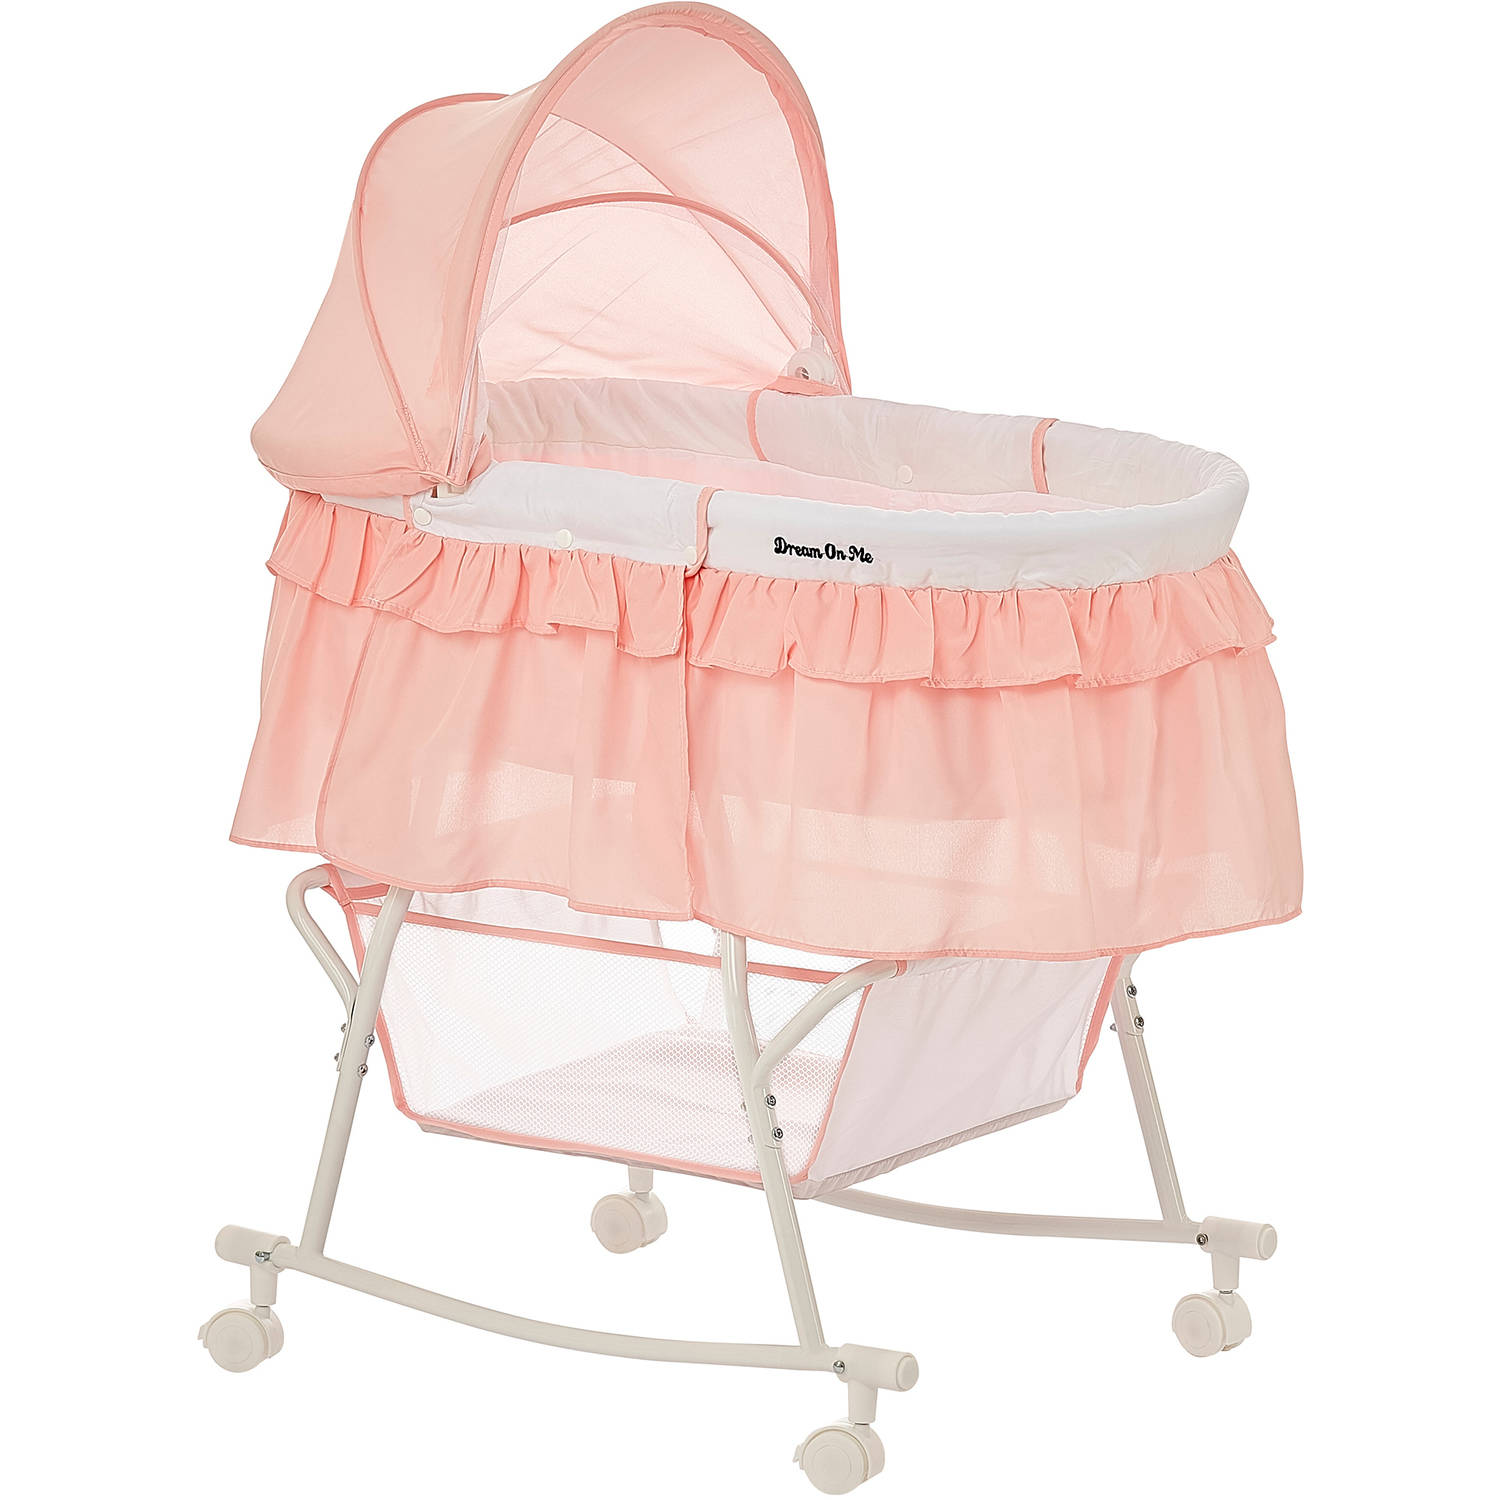 Dream On Me Lacy, Portable 2 in 1 Bassinet and Cradle in Rose Quartz - image 5 of 7